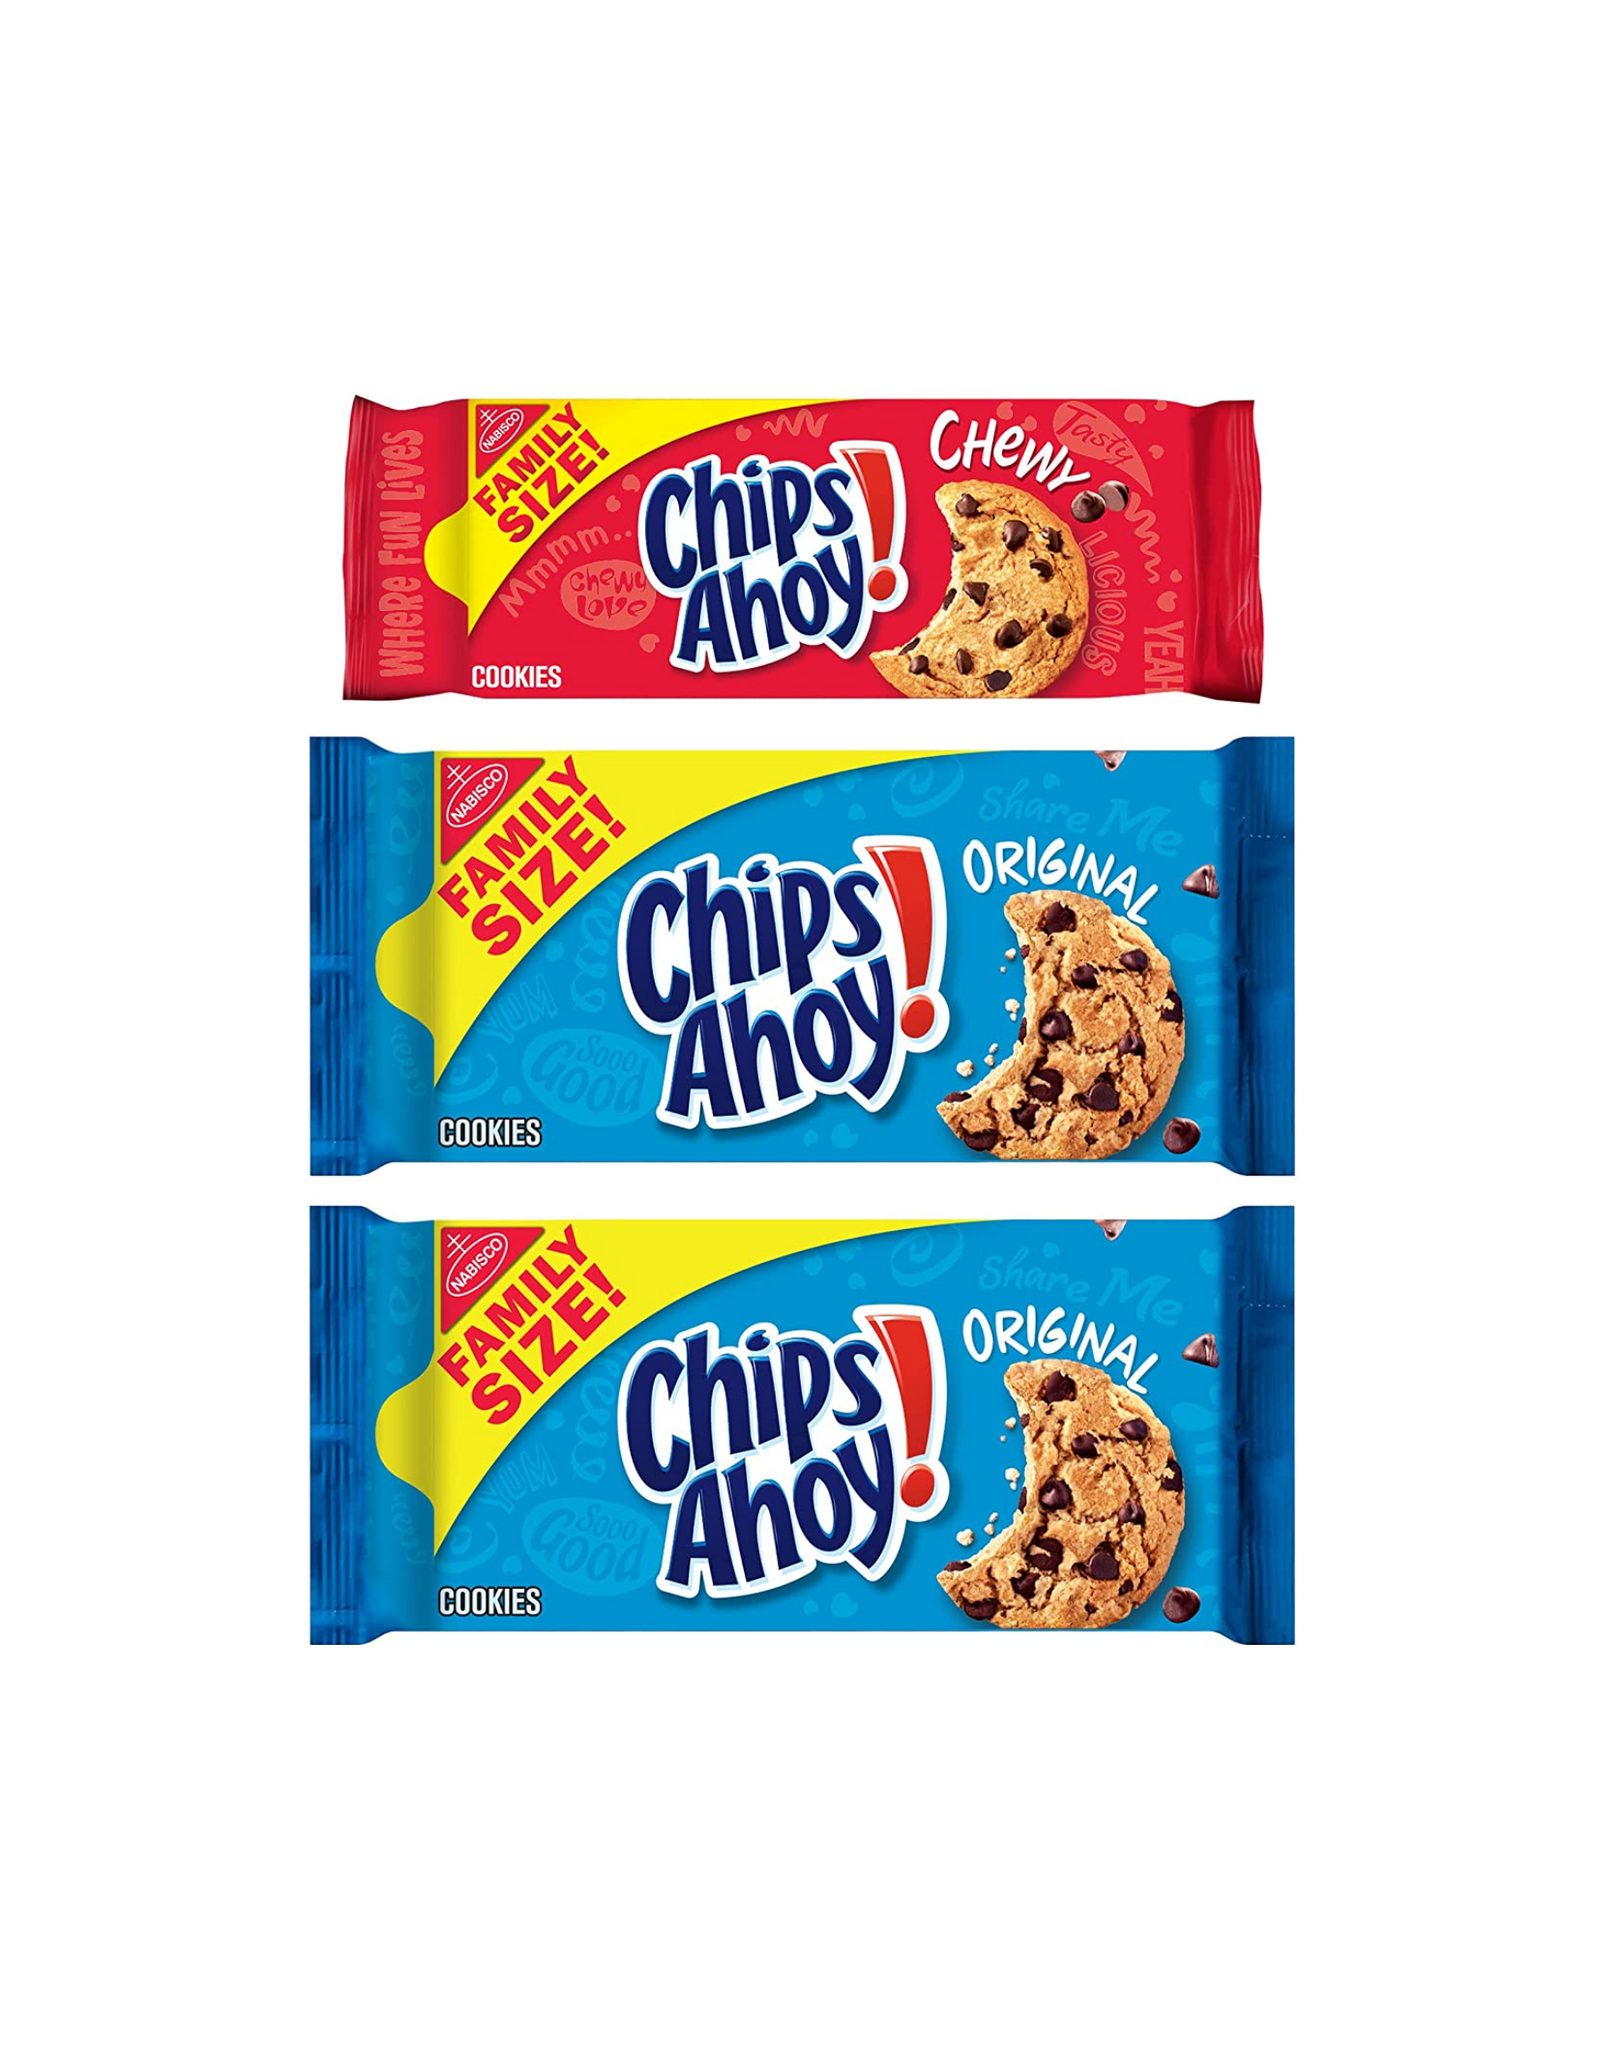 CHIPS AHOY! Original Chocolate Chip Cookies & Chewy Cookies Bundle, Family Size, 3 Ct (Pack of 1)